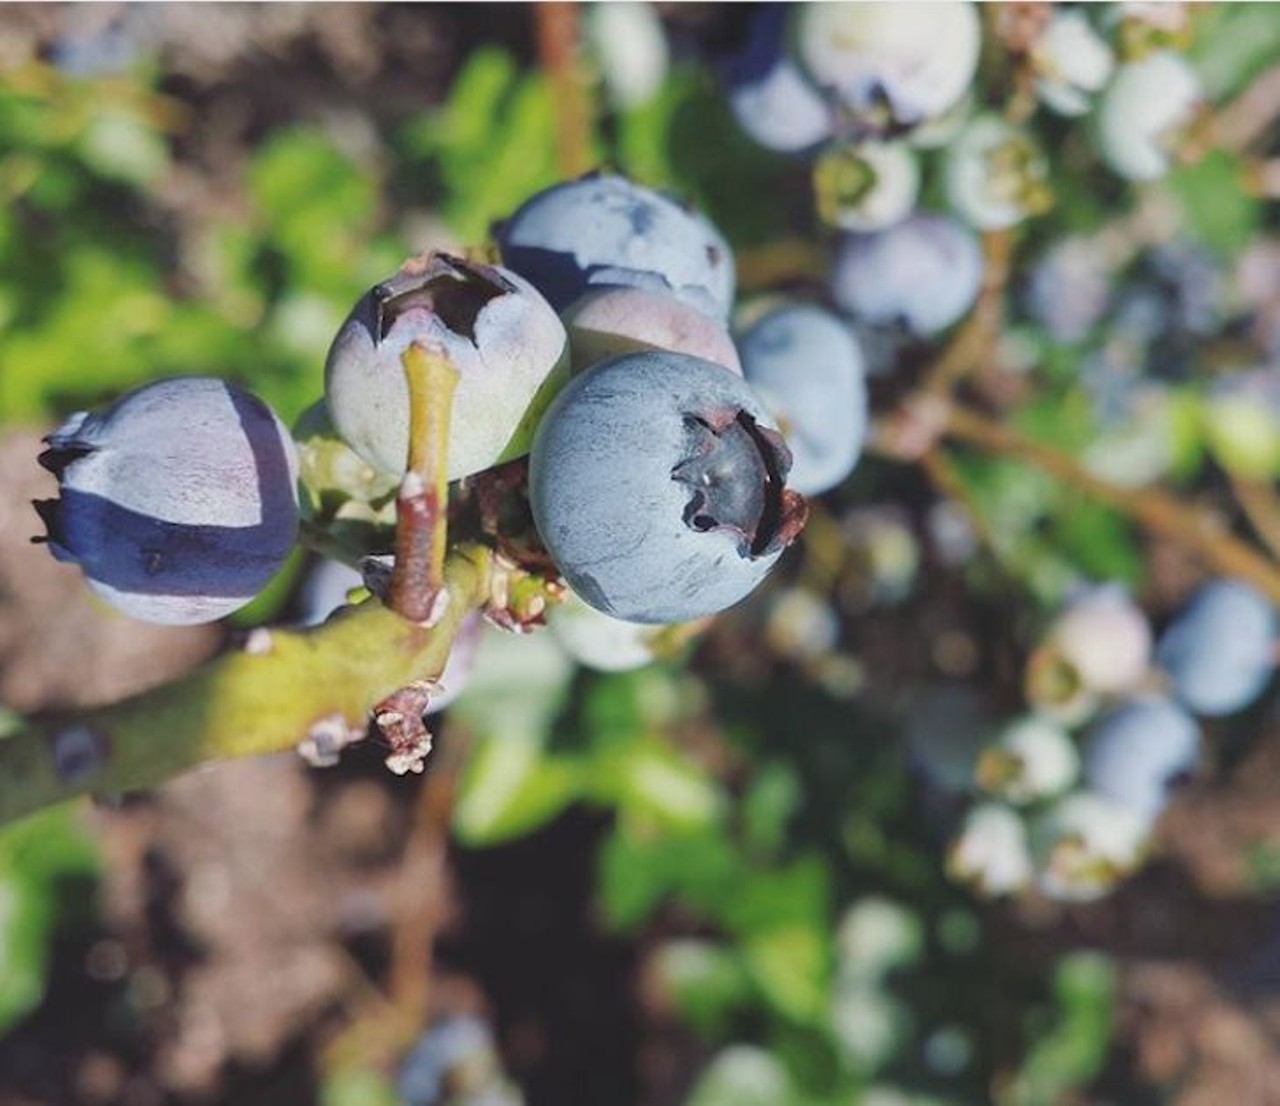 B&G Rucks U-Pick Blueberries
1031 Oak Shore Dr., Saint Cloud, 407-928-1261
You&#146;ll have to keep your eyes peeled for this one. Days and time varying and social media is your best bet for updates, but one thing is for sure, it&#146;s $3.50 per pound. 
Distance from Orlando: 38 minutes
Photo via mariebyerly/Instagram